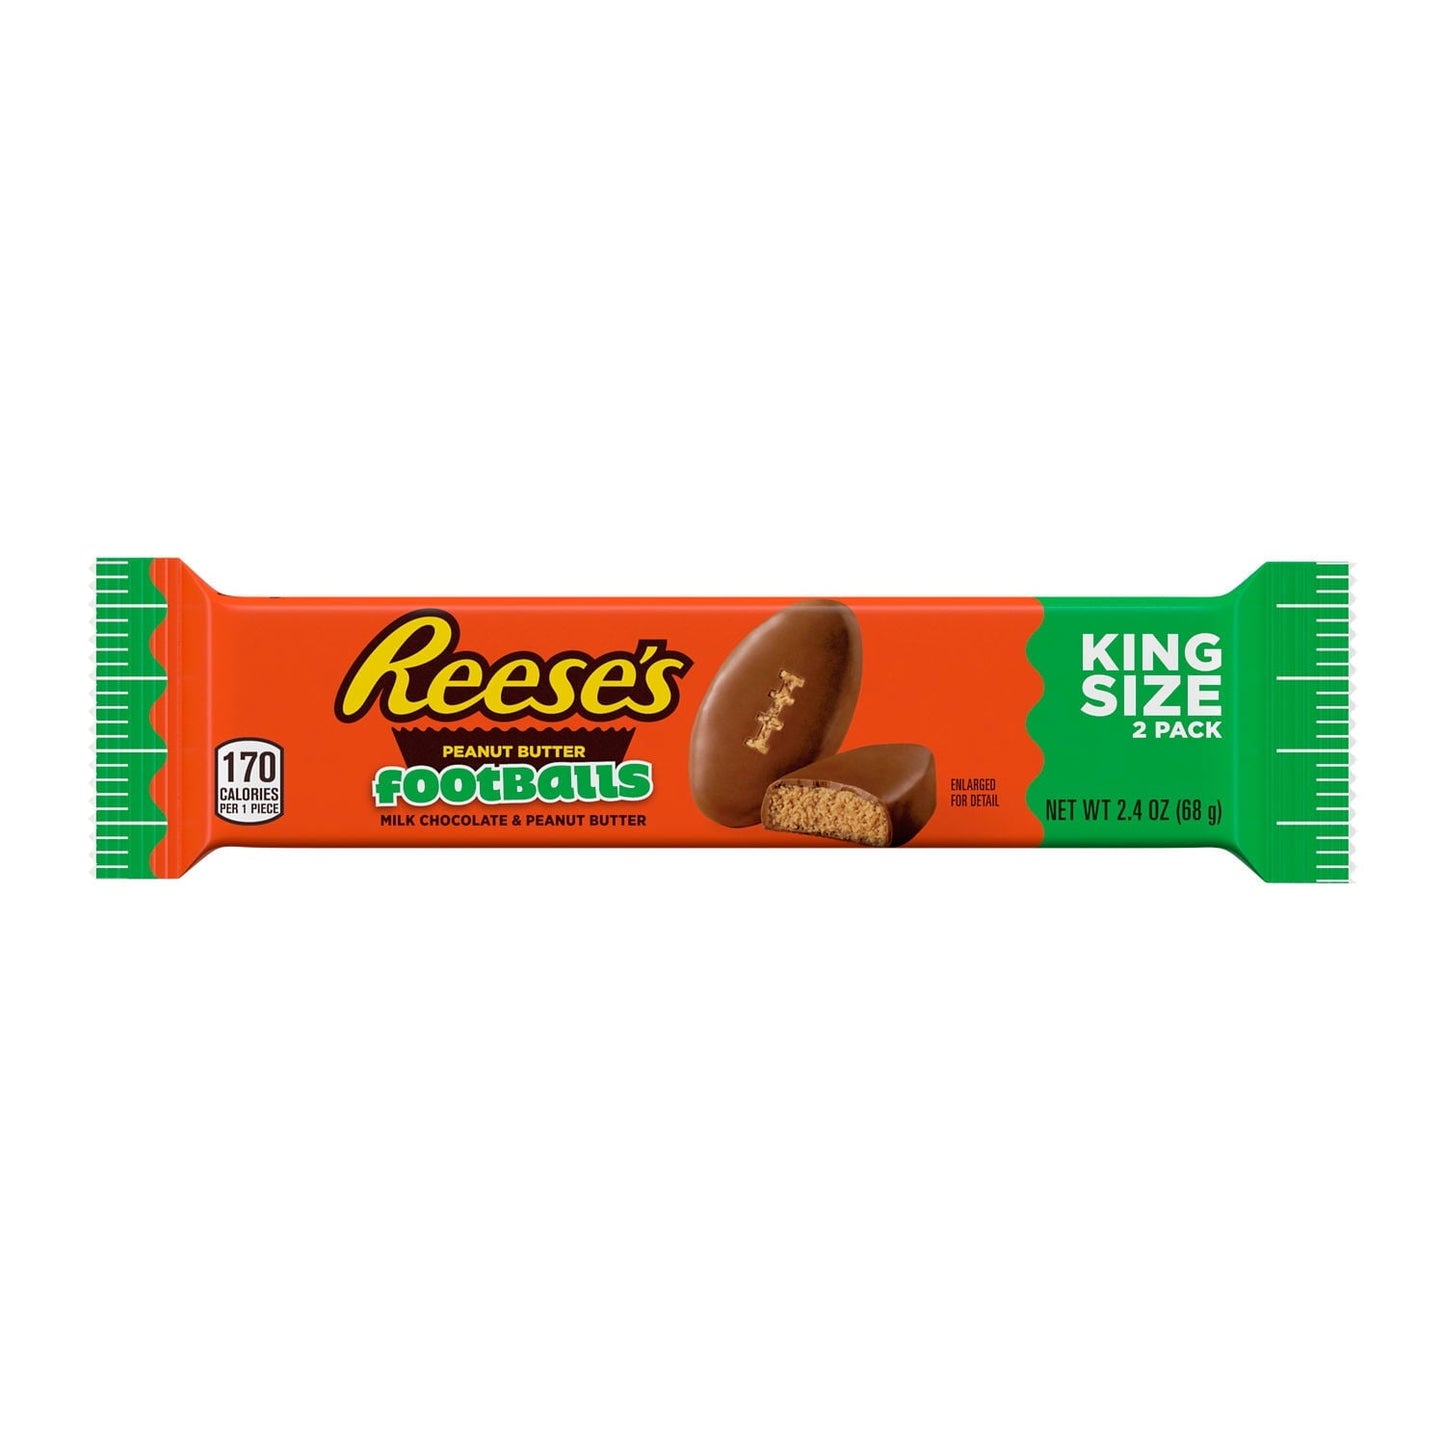 Reese's Milk Chocolate King Size Peanut Butter Footballs Candy, Pack 2.4 oz